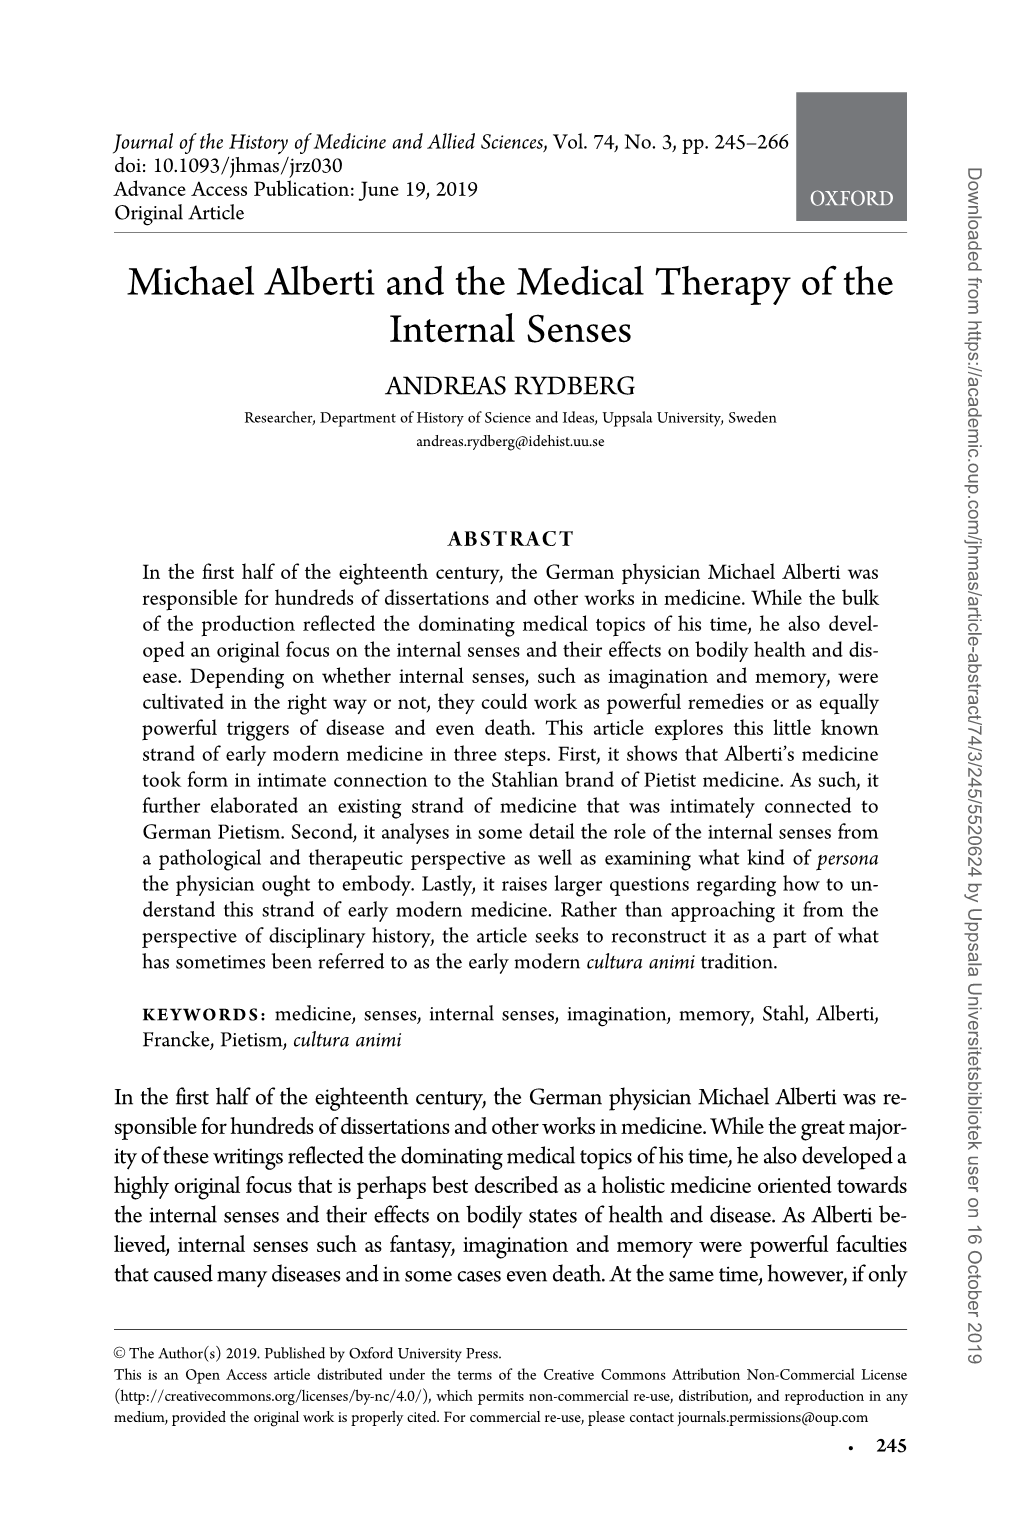 Michael Alberti and the Medical Therapy of the Internal Senses